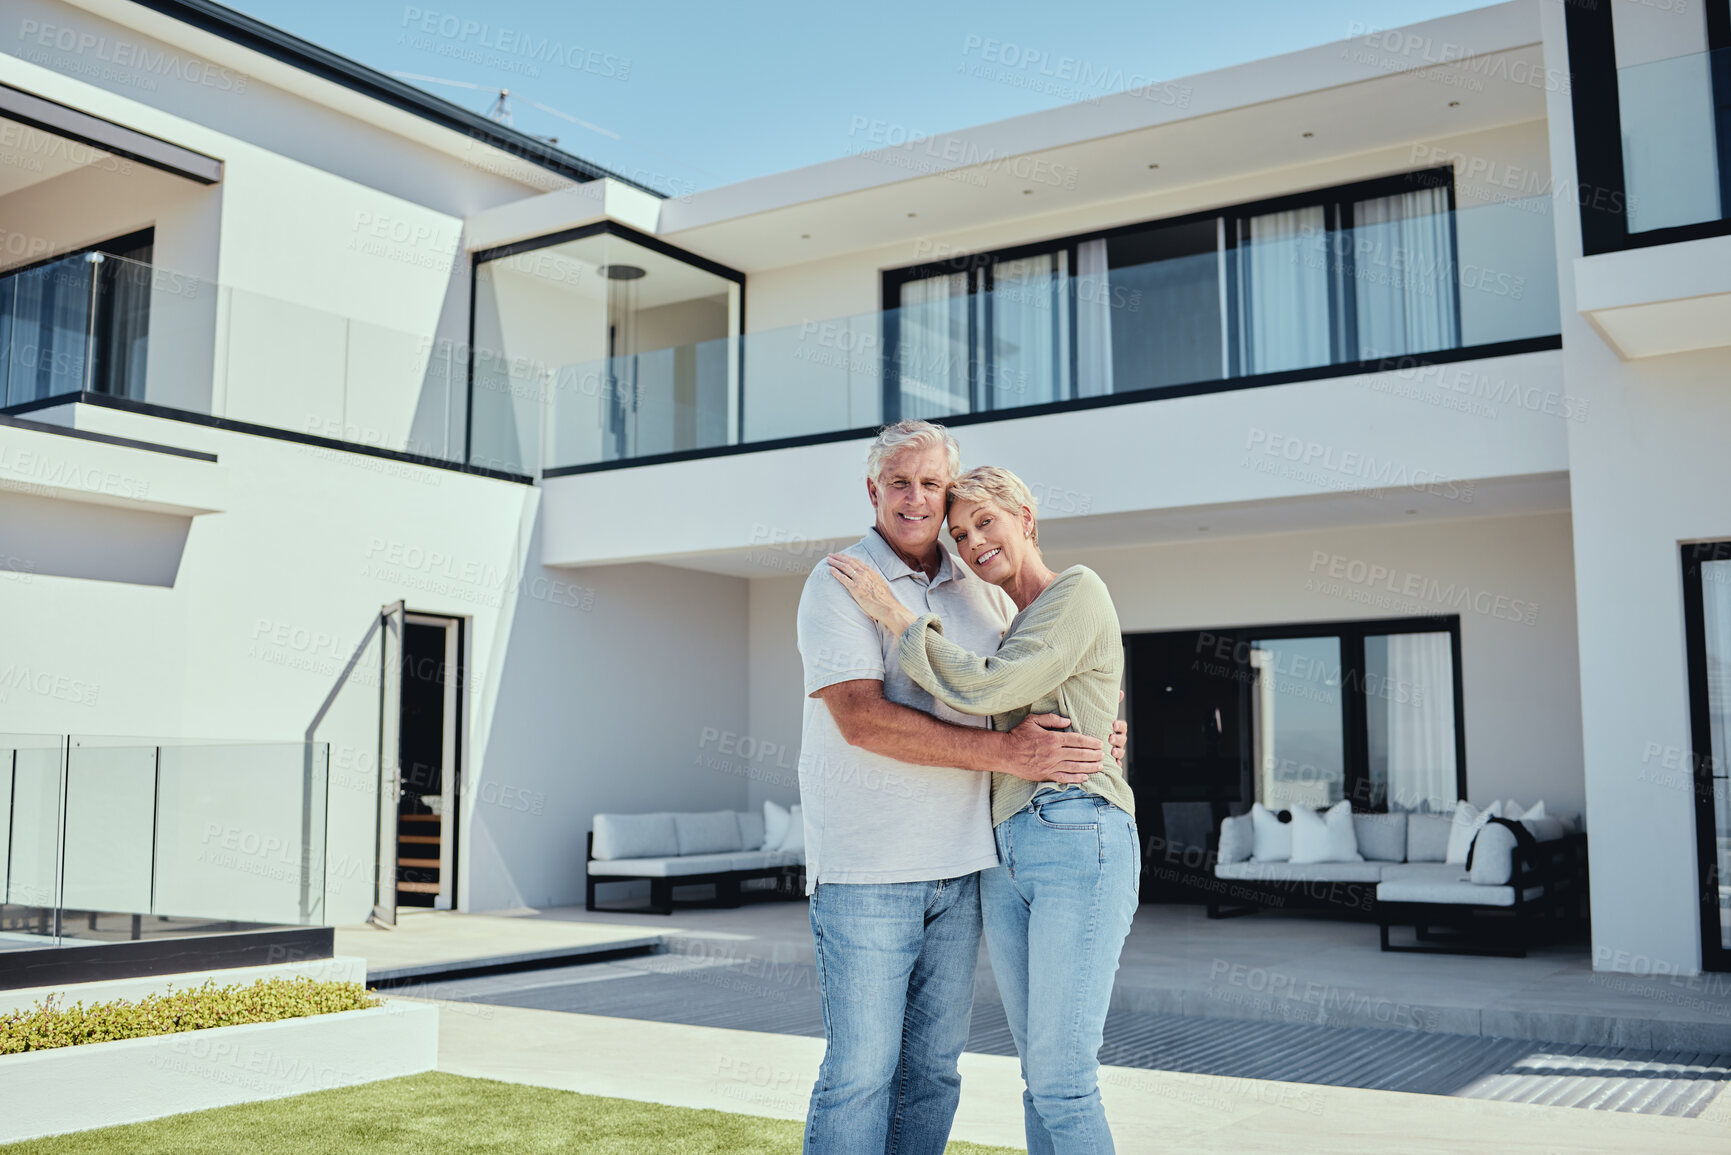 Buy stock photo Real estate, couple and happiness of people with a new house property purchase outdoor. Portrait of happy, smile and marriage of a senior man and woman together in retirement smiling with a hug